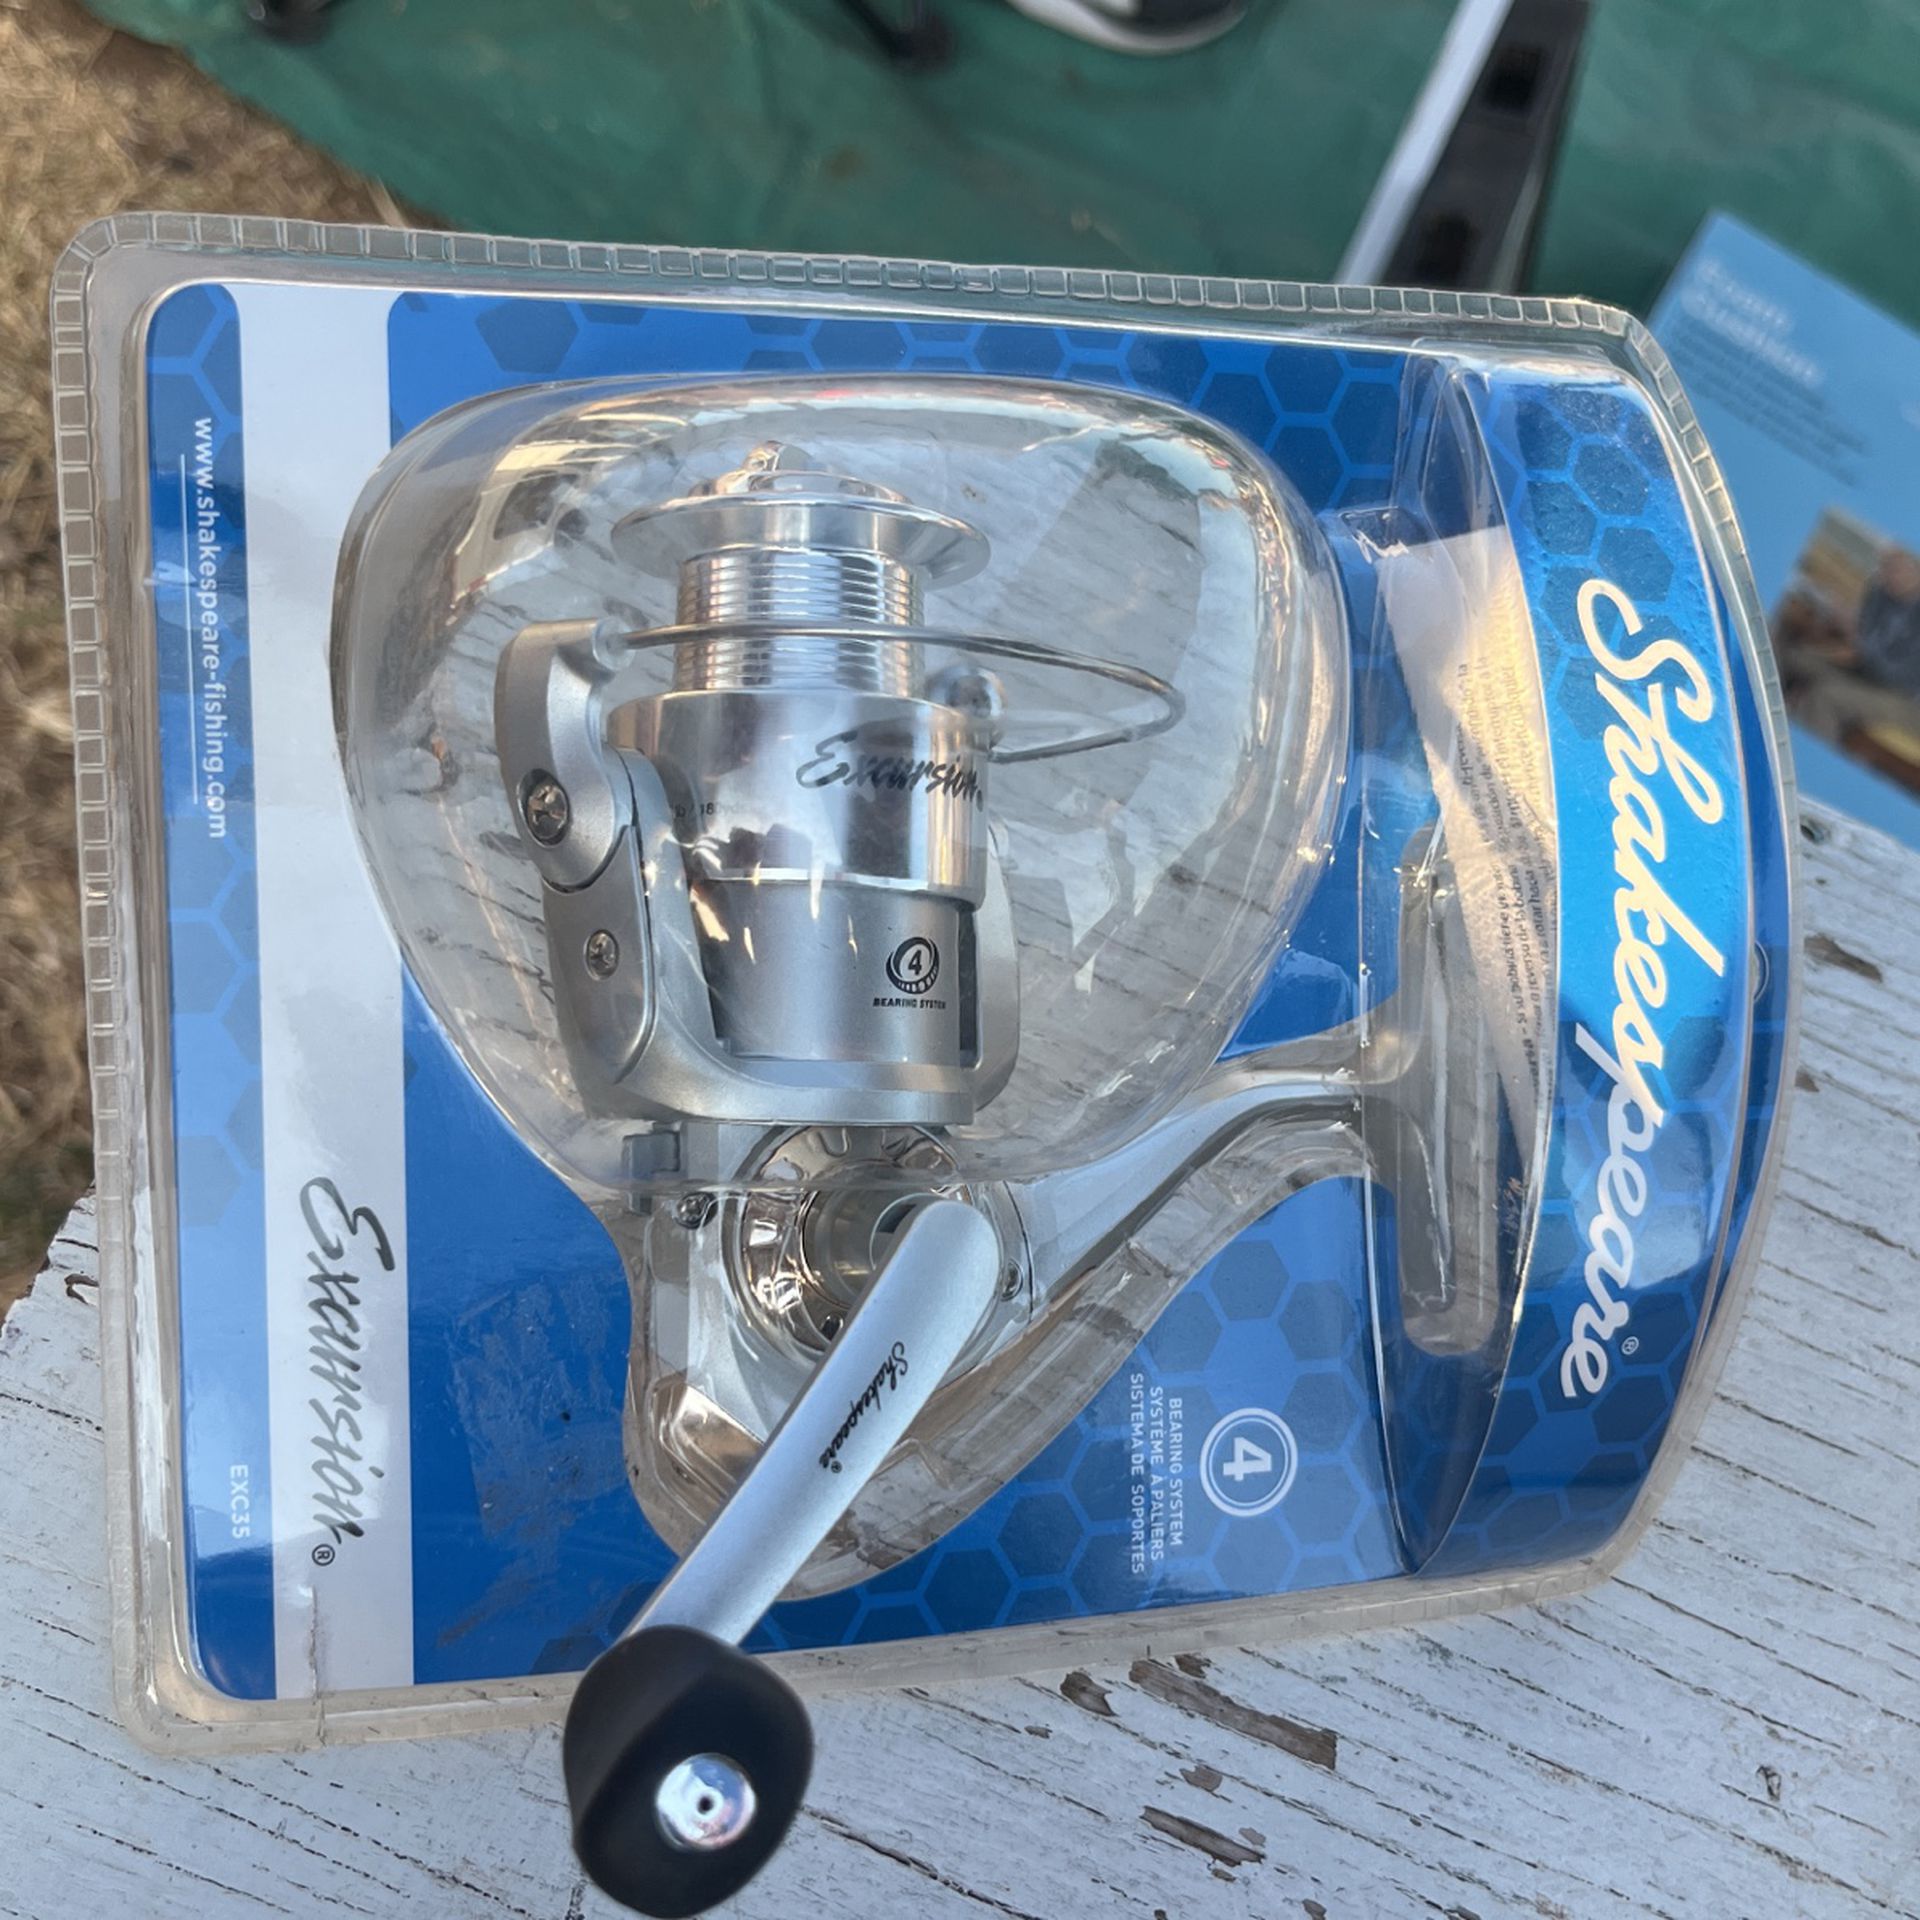 Shakespeare Excursion Fishing Spinning Reel for Sale in San Antonio, TX -  OfferUp